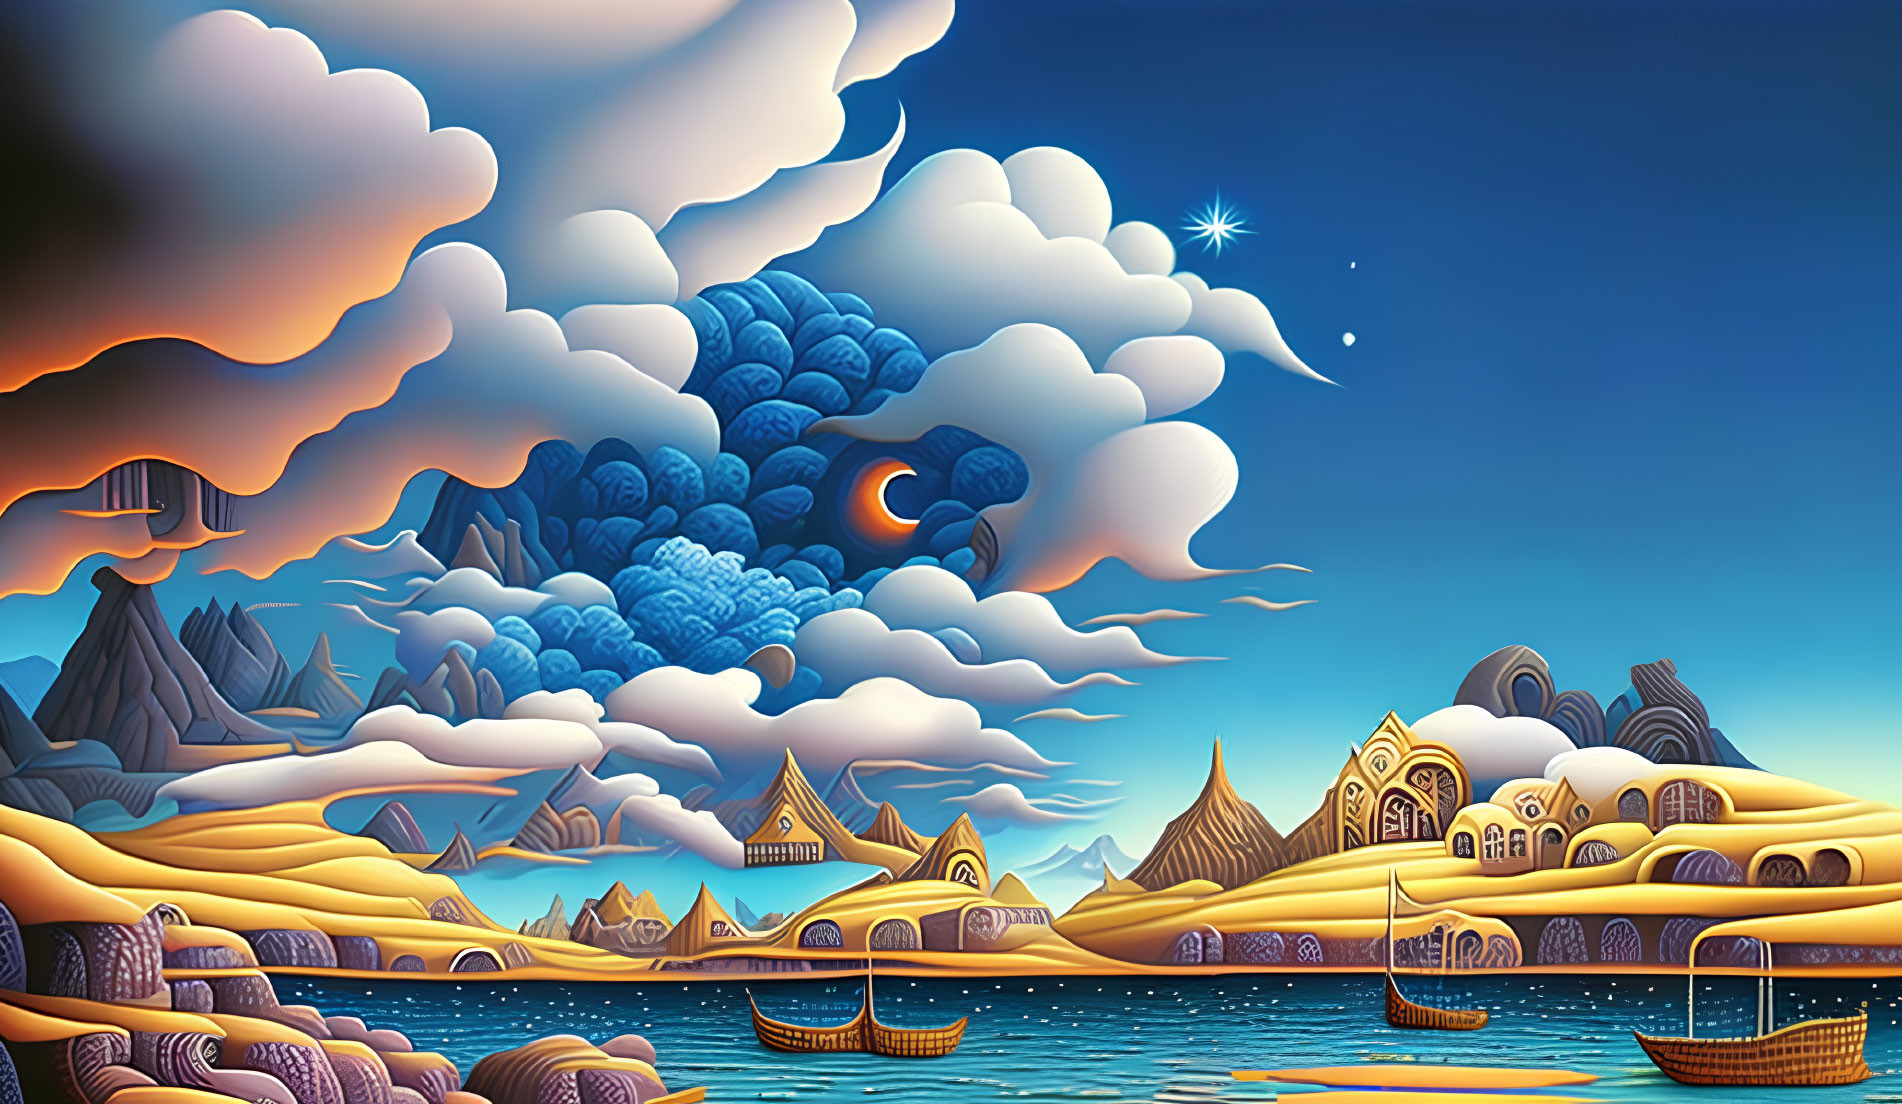 Whimsical surreal landscape with crescent moon, star, stylized mountains, quaint houses, and